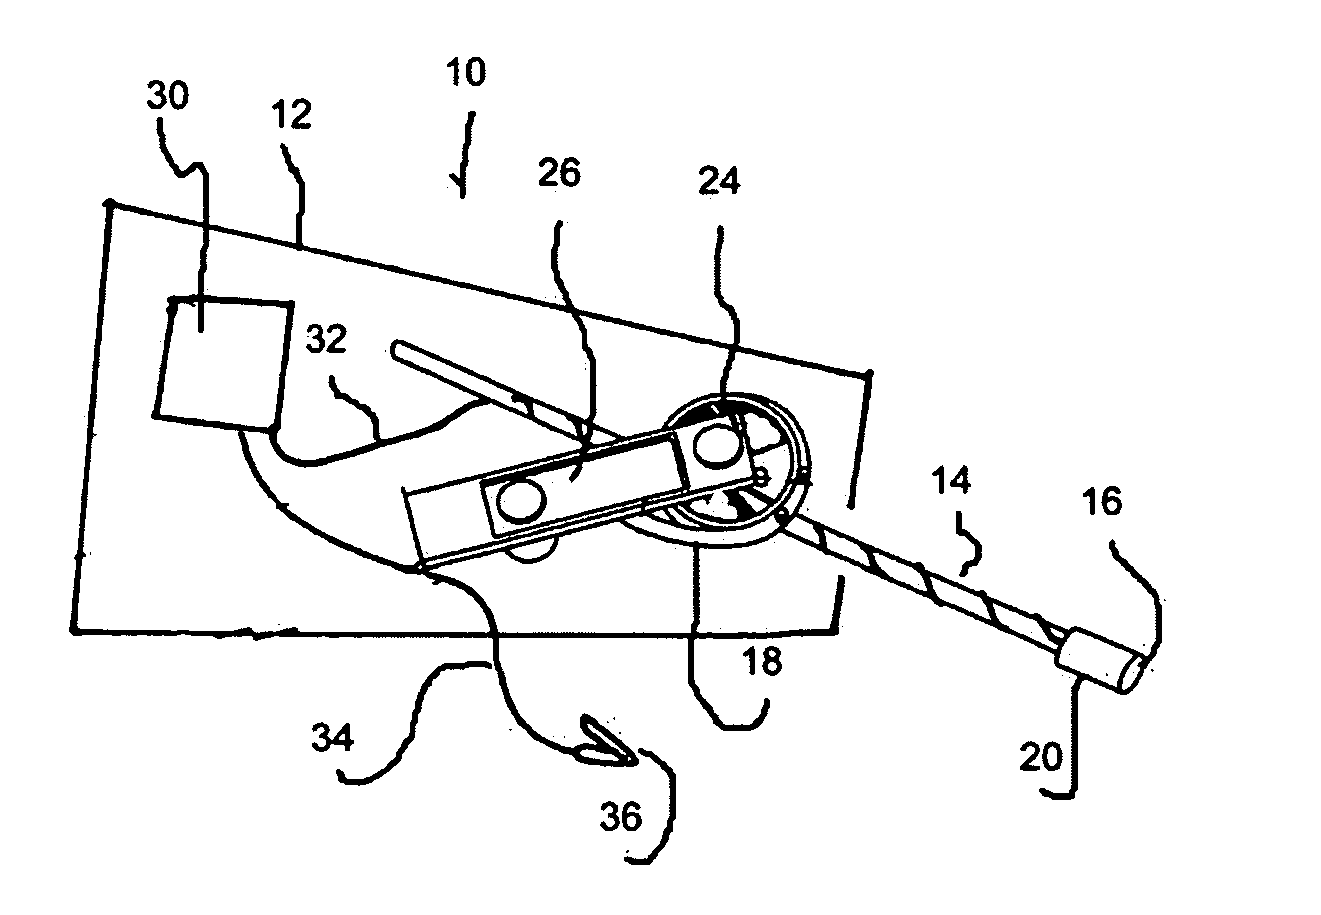 Apparatus and method for testing an edge of a workpiece for sharpness